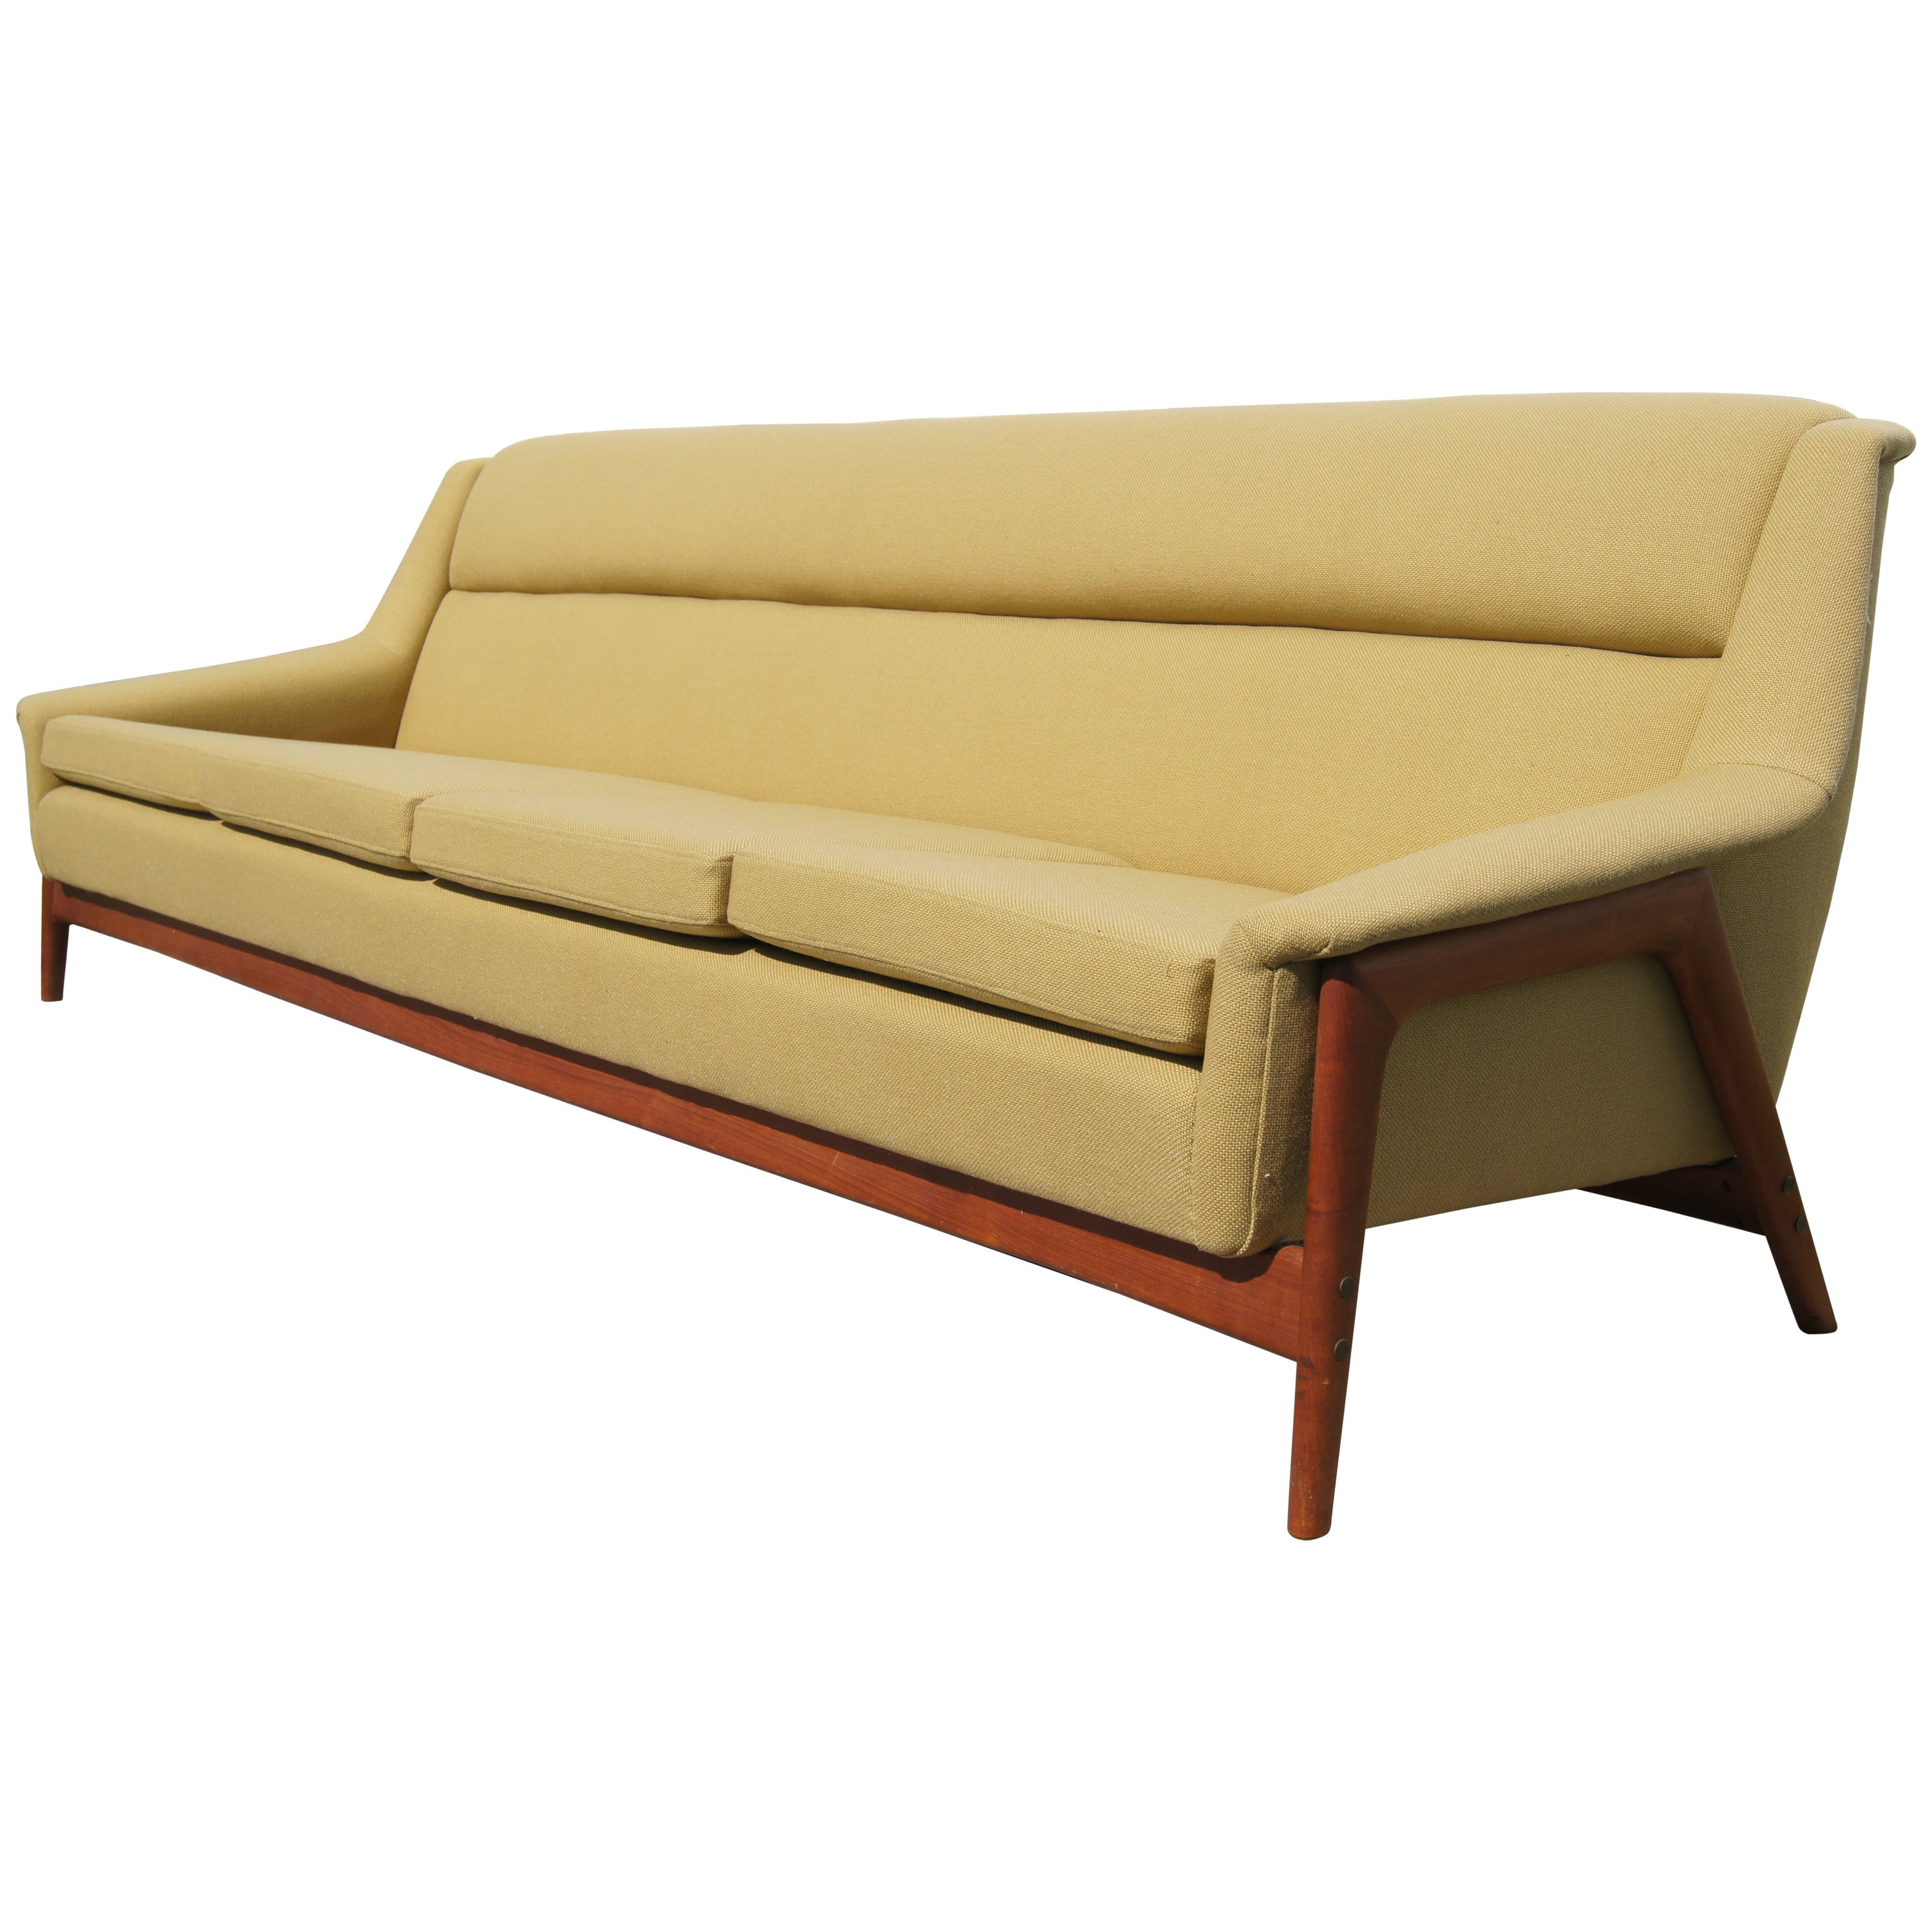 Four-Seater Sofa by Folke Ohlsson for Dux